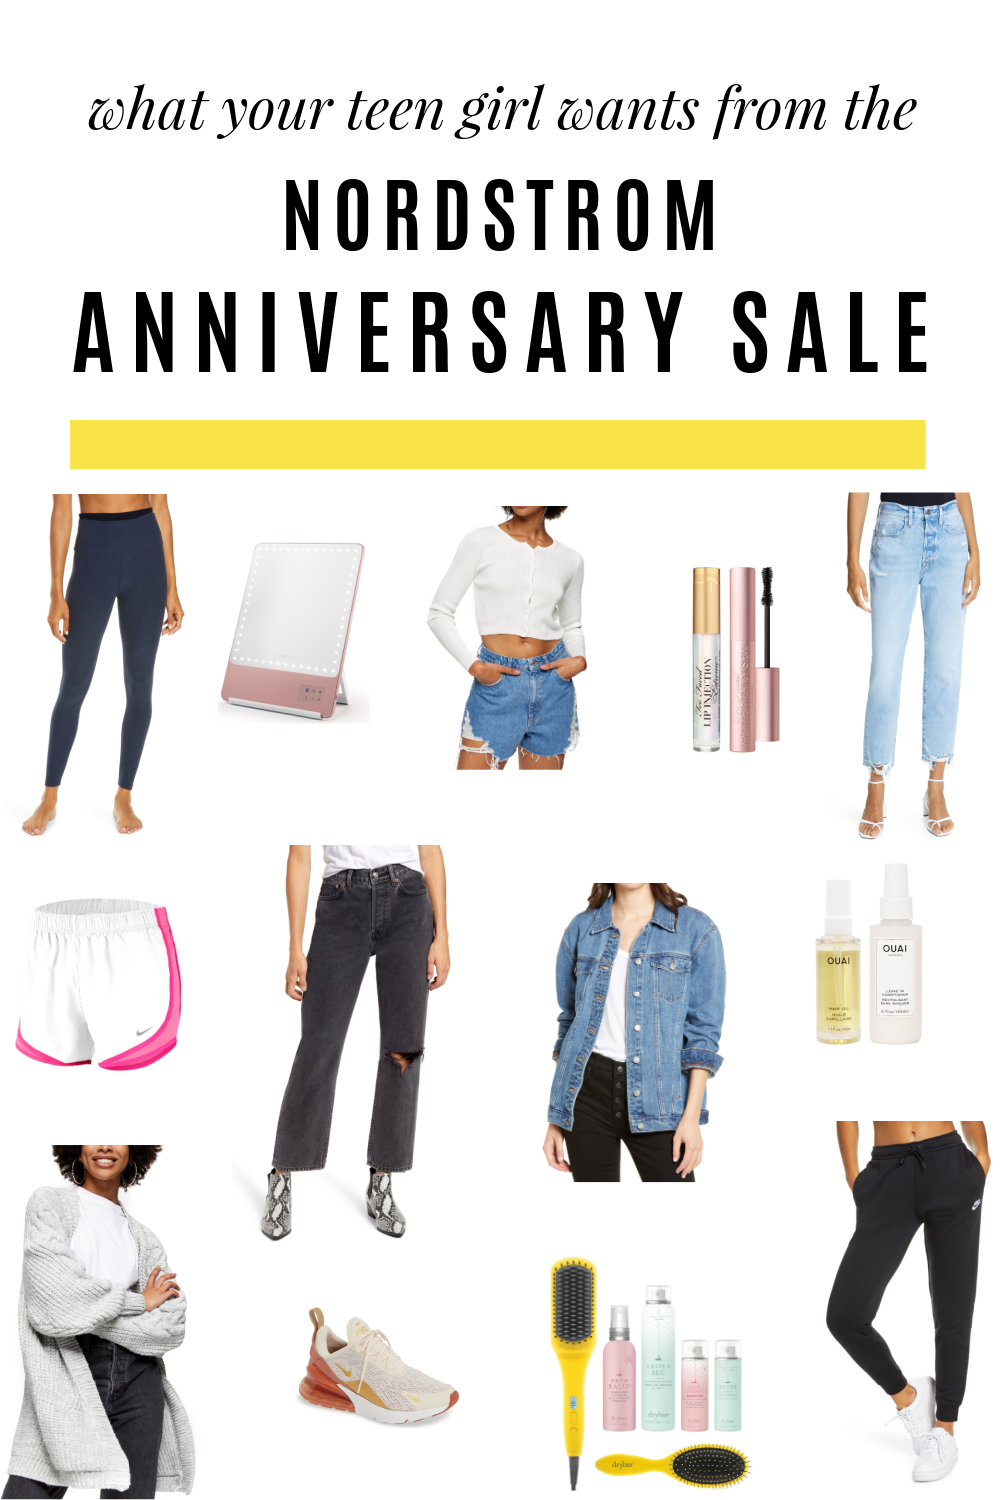 16 Barbiecore products on sale during the Nordstrom 'Anniversary